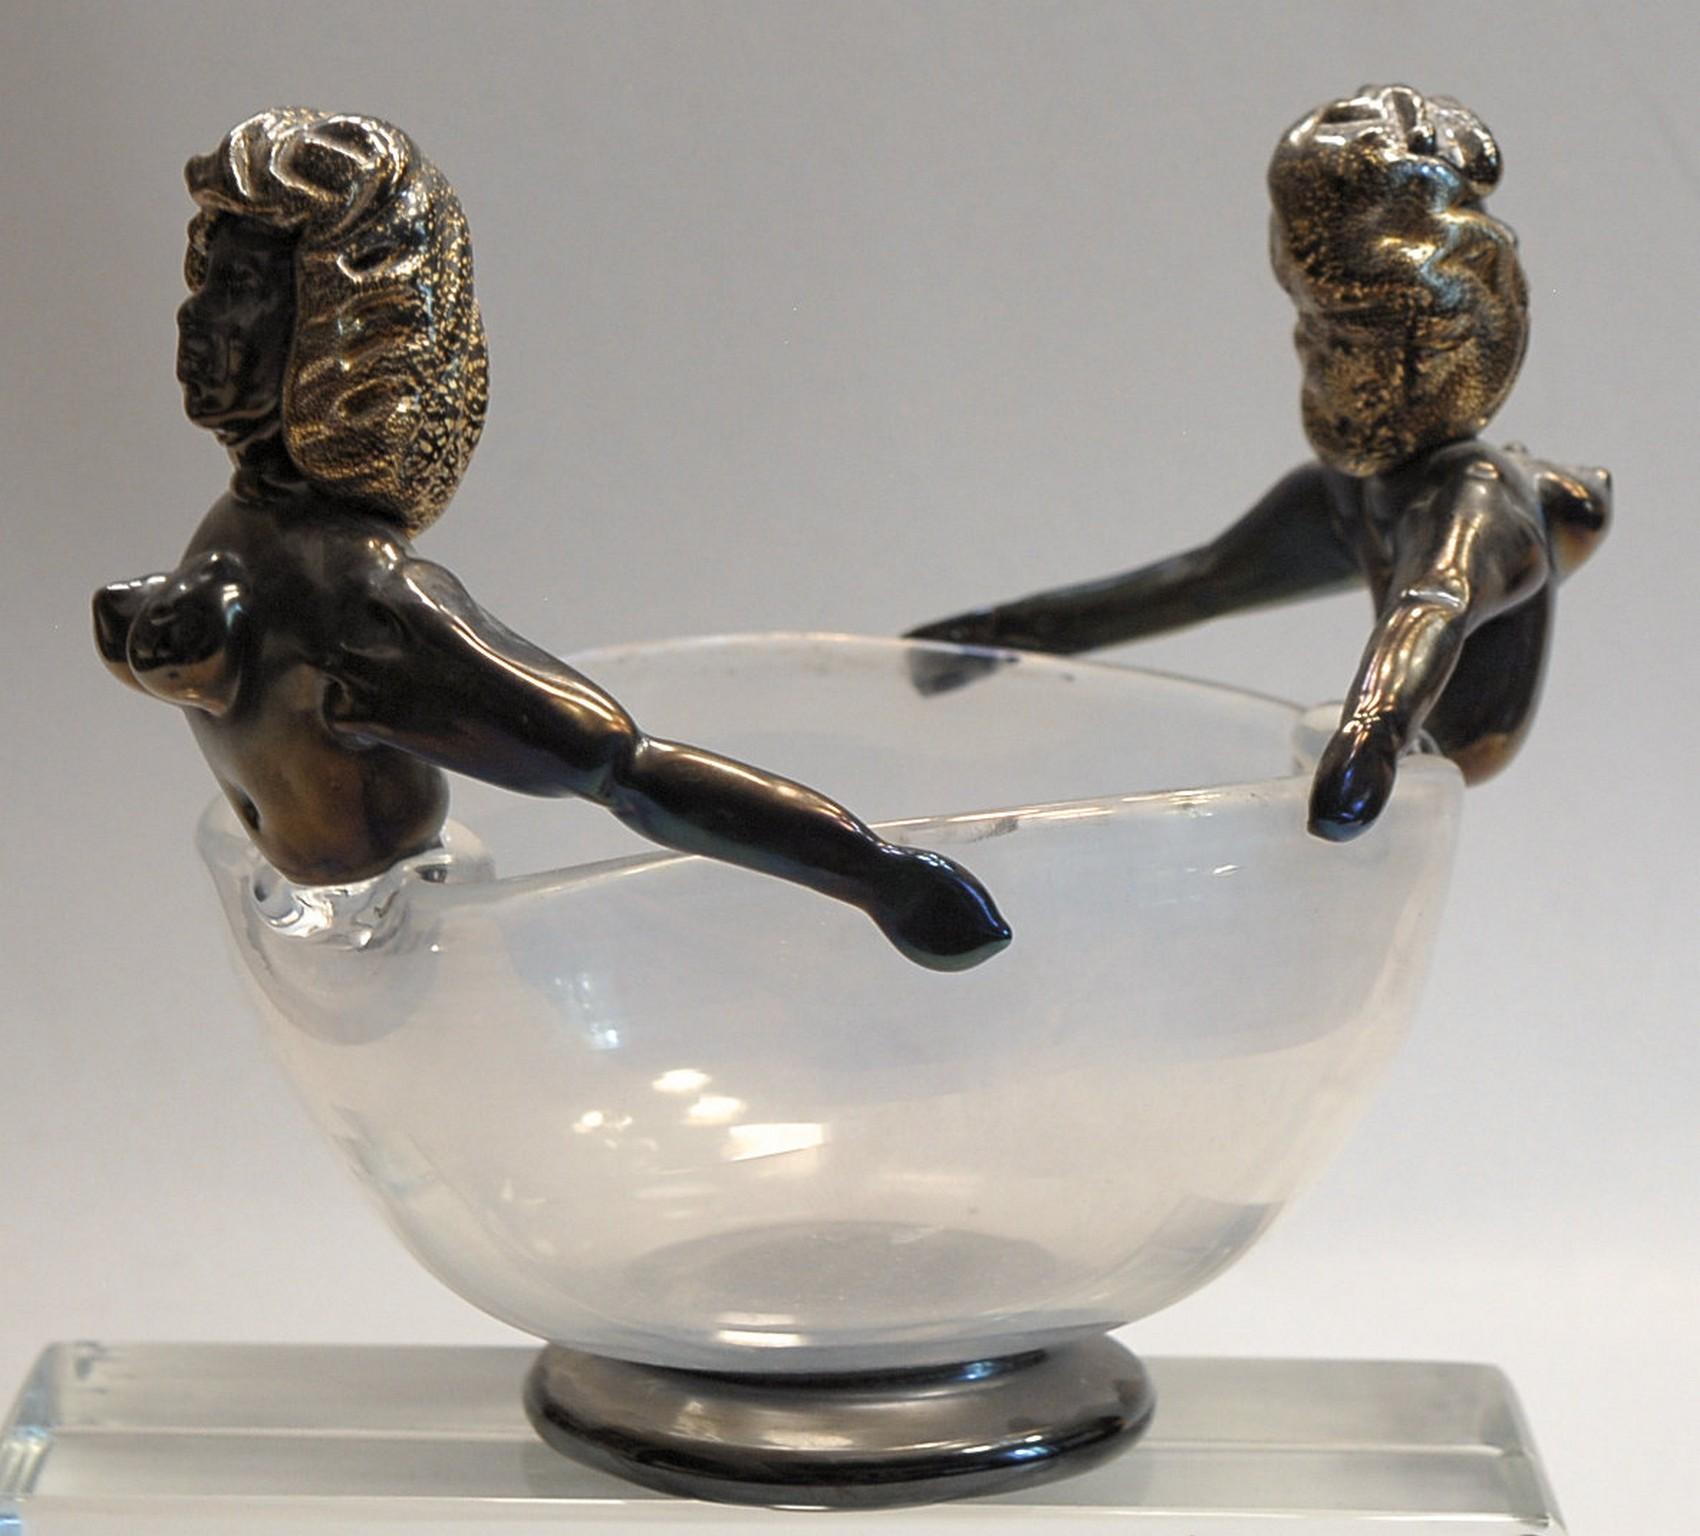 Art Deco Iridescent Bowl with figurine in Figurehead Position, Ercole Barovier, 1930 For Sale